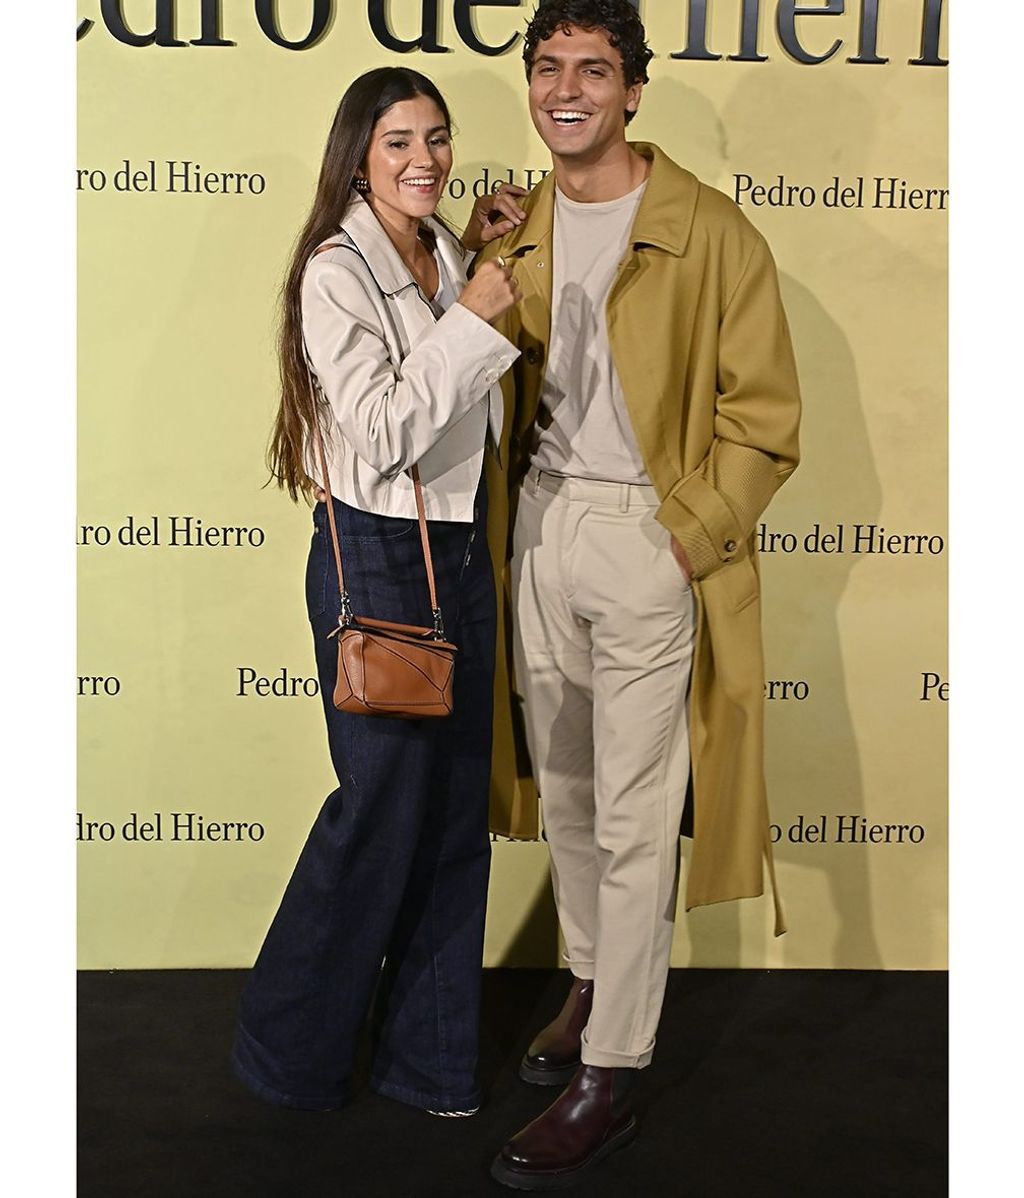 Tomas Paramo and Maria de Jaime at the front row of “PedrodelHierro” collection during Pasarela Cibeles Mercedes-Benz Fashion Week Madrid 2023 in Madrid,14 September 2023.